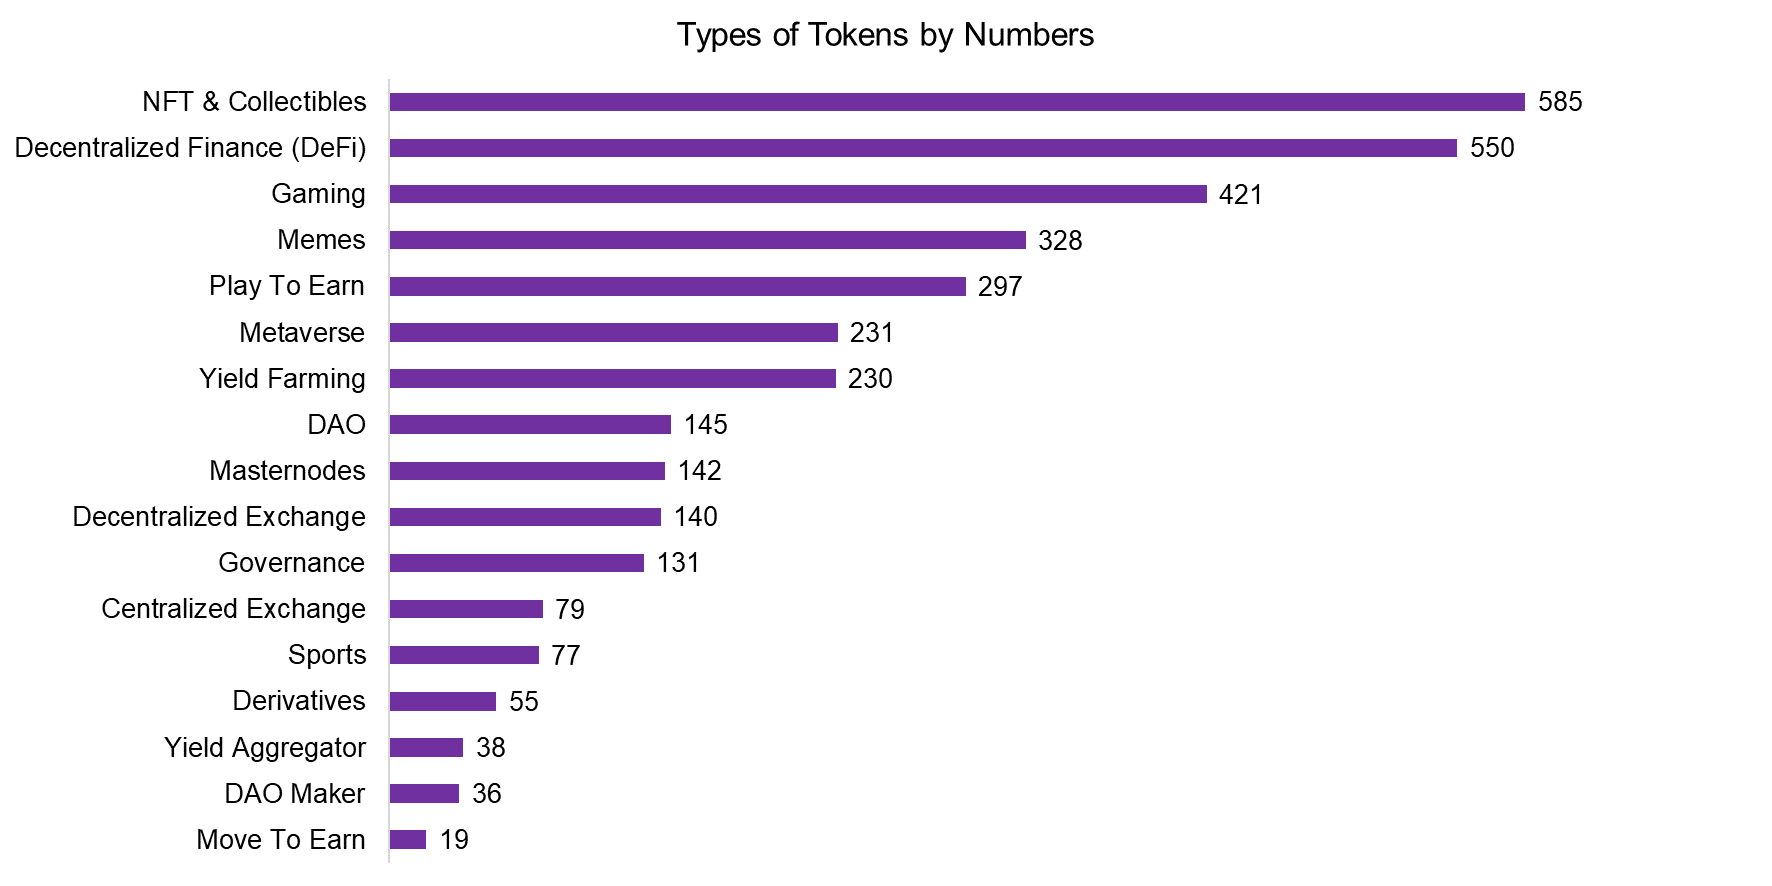 Types of Tokens by Numbers